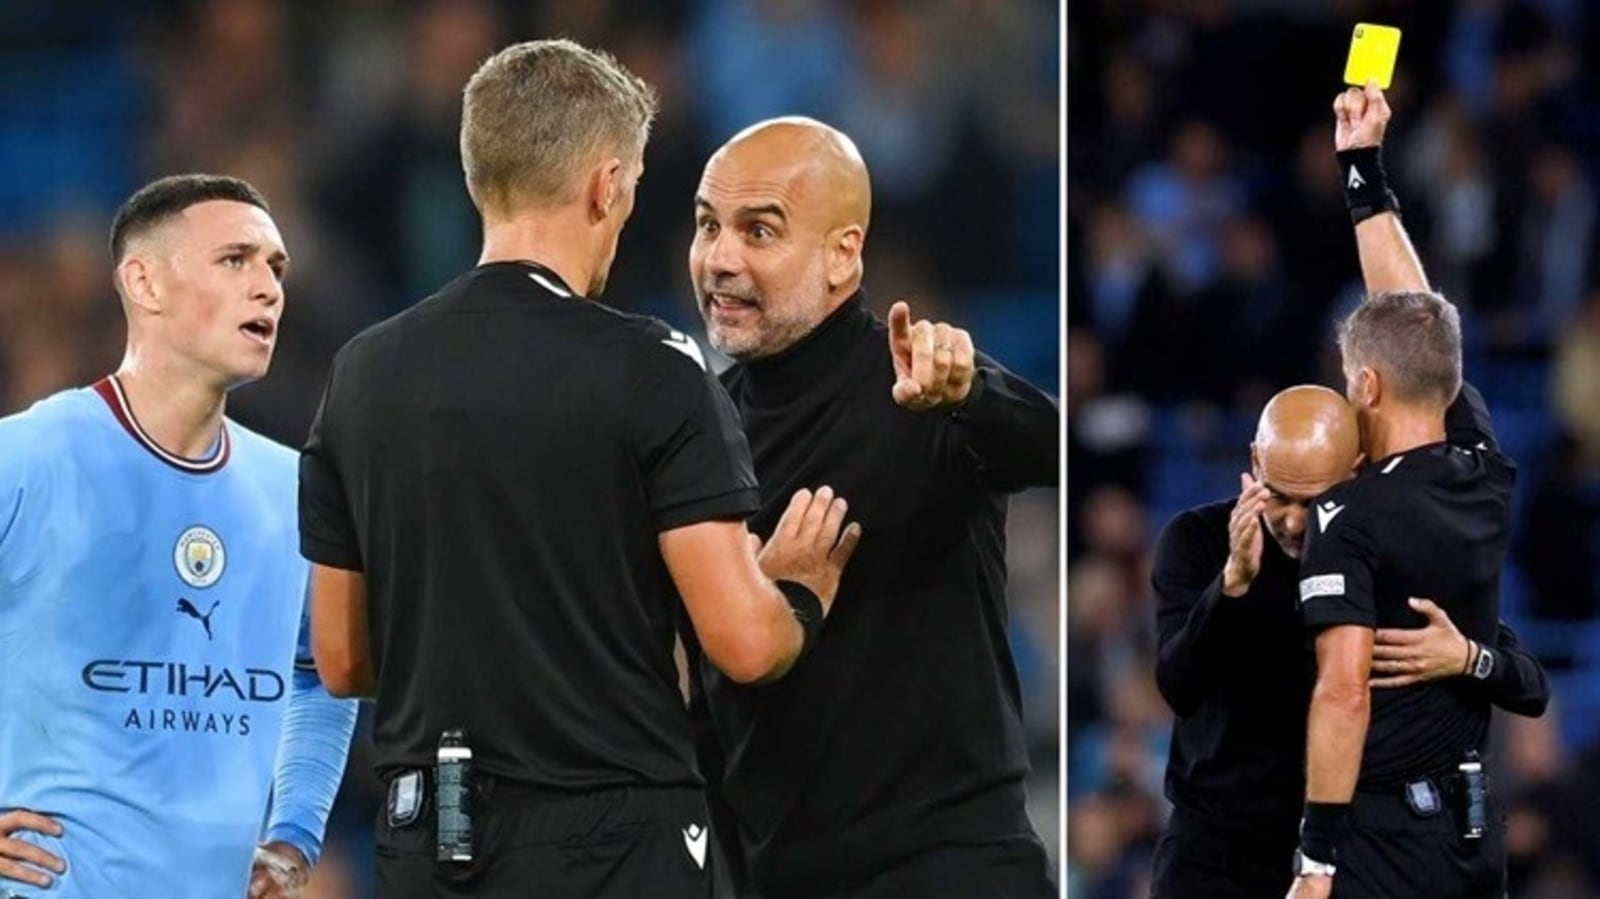 Pep Guardiola hilariously hugs referee after being booked as Manchester City beat Dortmund at Champions League